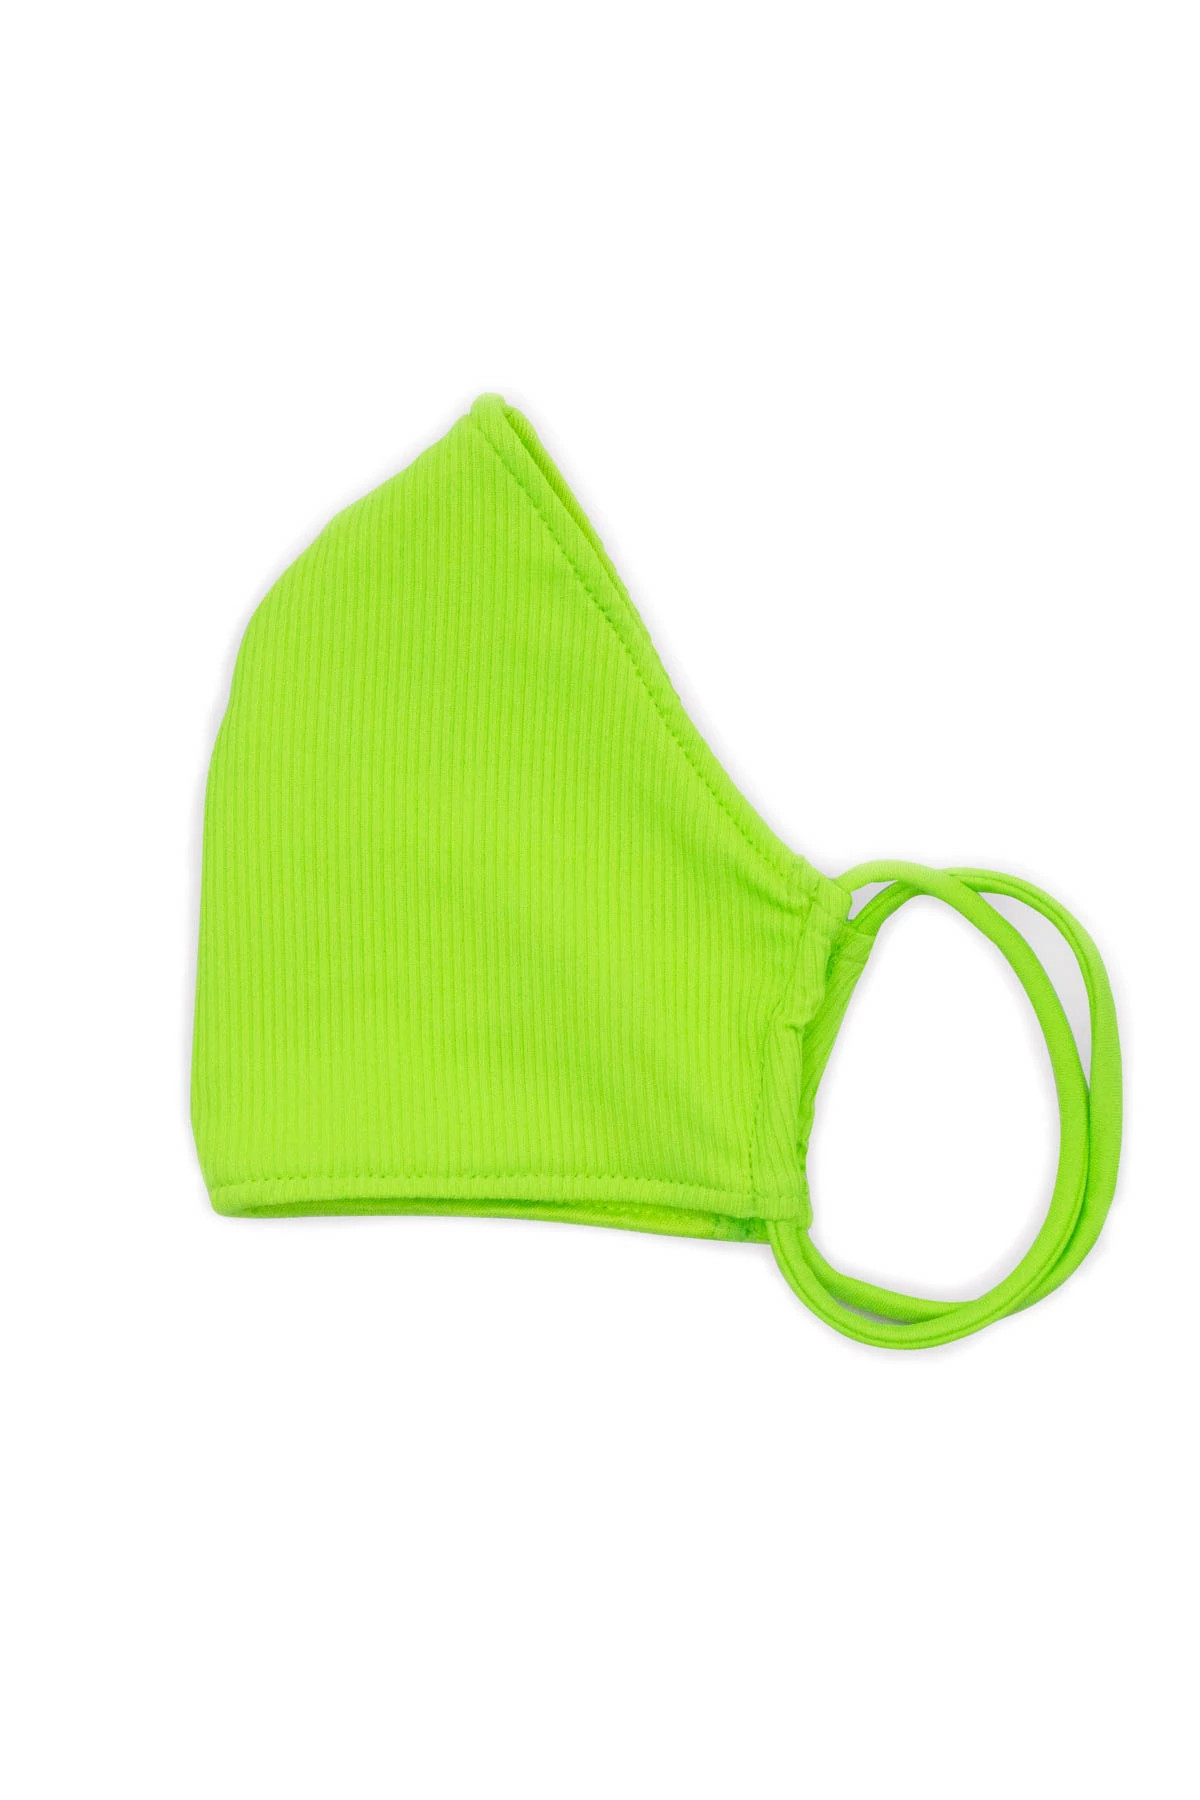 LIME Lime Ribbed Adult Face Mask image number 2